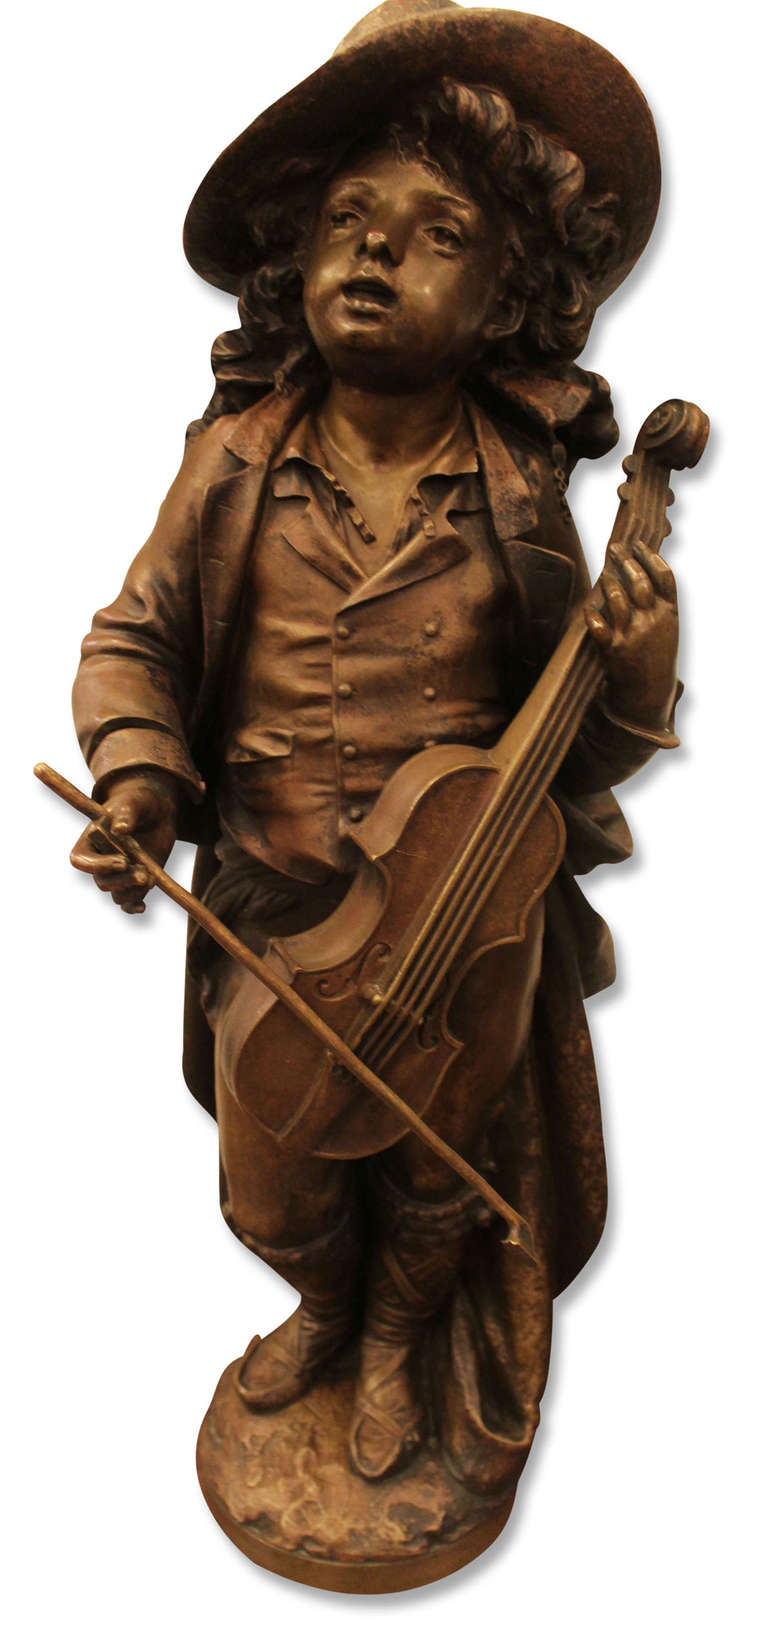 A large version of the 19th century bronze of boy with violin by Adolph Maubach with a wonderful patina. Please note, this item is located in one of our NYC locations.